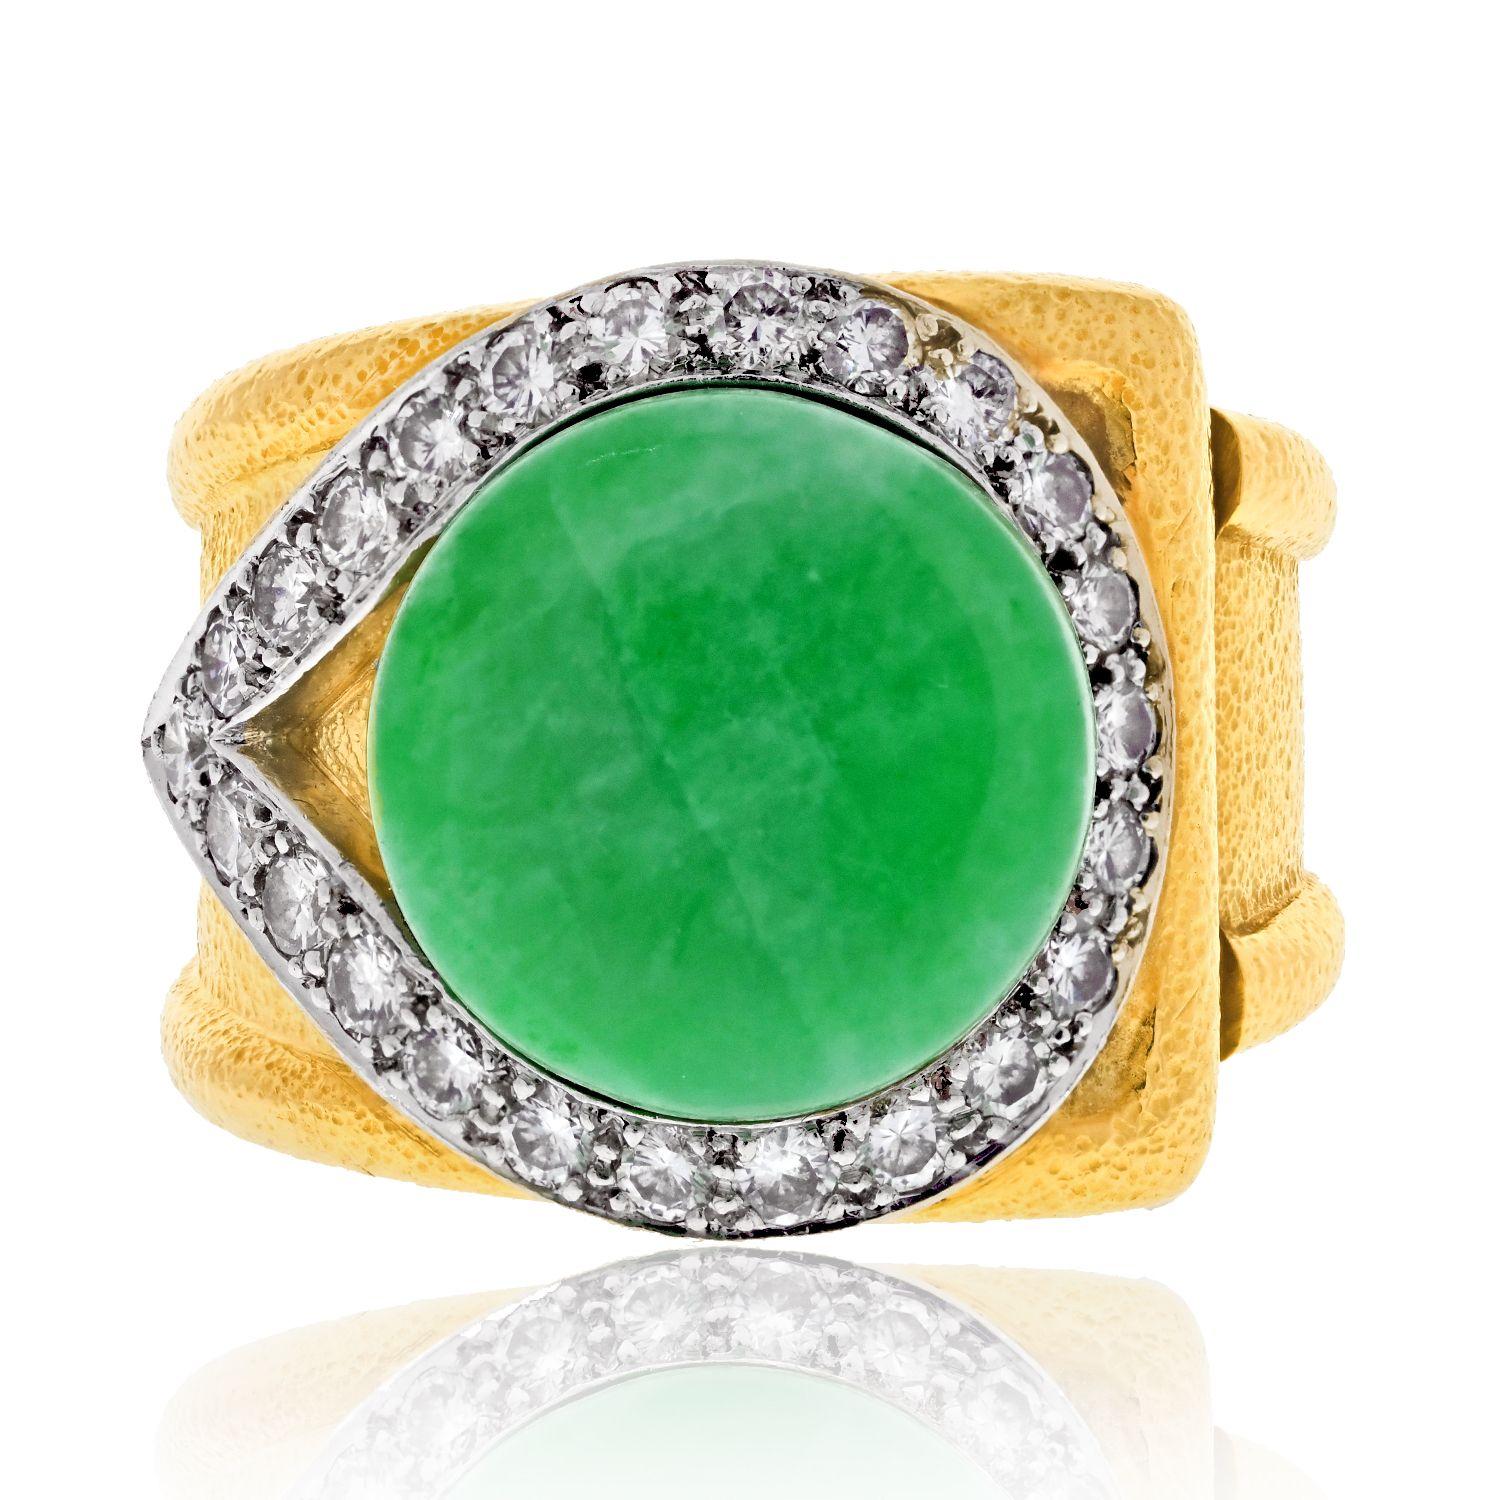 Exquisite craftsmanship and captivating design merge seamlessly in this David Webb Platinum & 18K Yellow Gold Jadeite Diamond Hammered Finish Cocktail Ring. The focal point of the ring is a round, flat-shaped jadeite, radiating its natural beauty